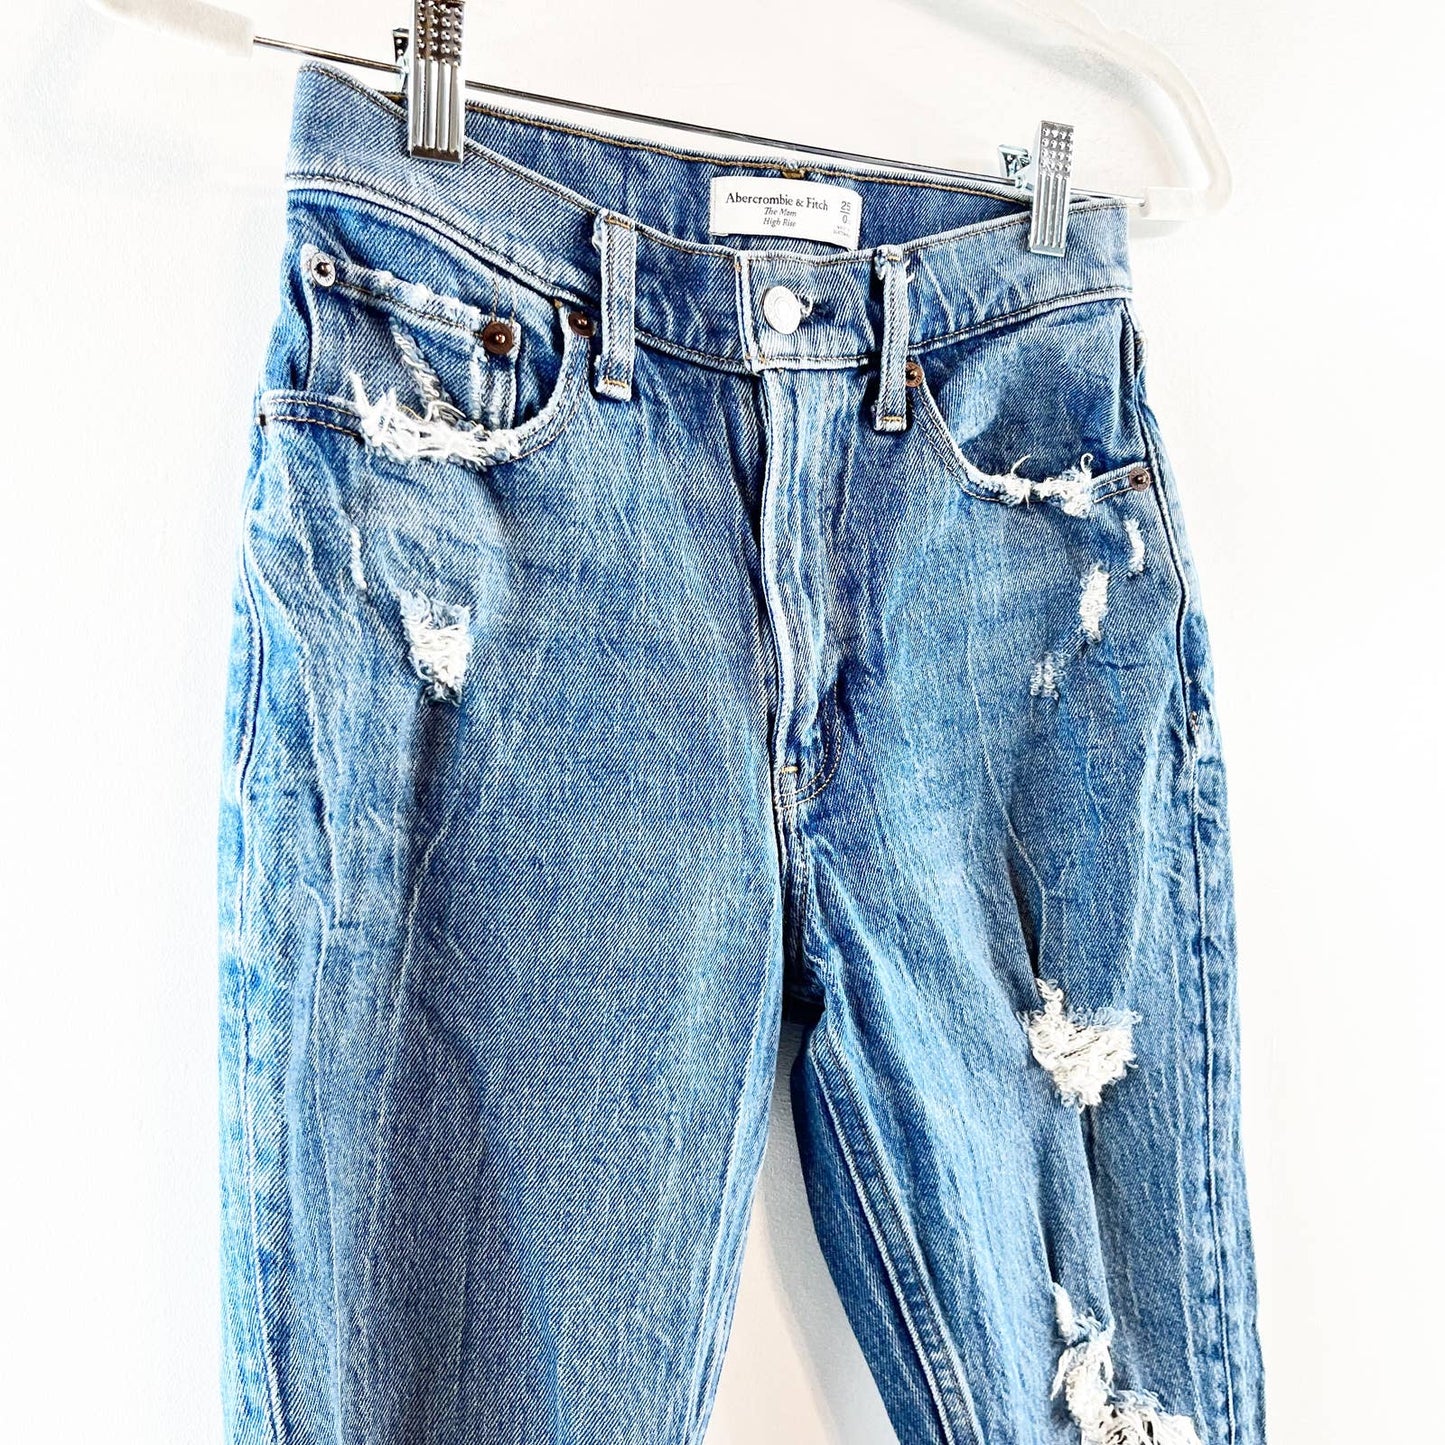 Abercrombie & Fitch The Mom High Rise Distressed Jeans Blue 25 Petite